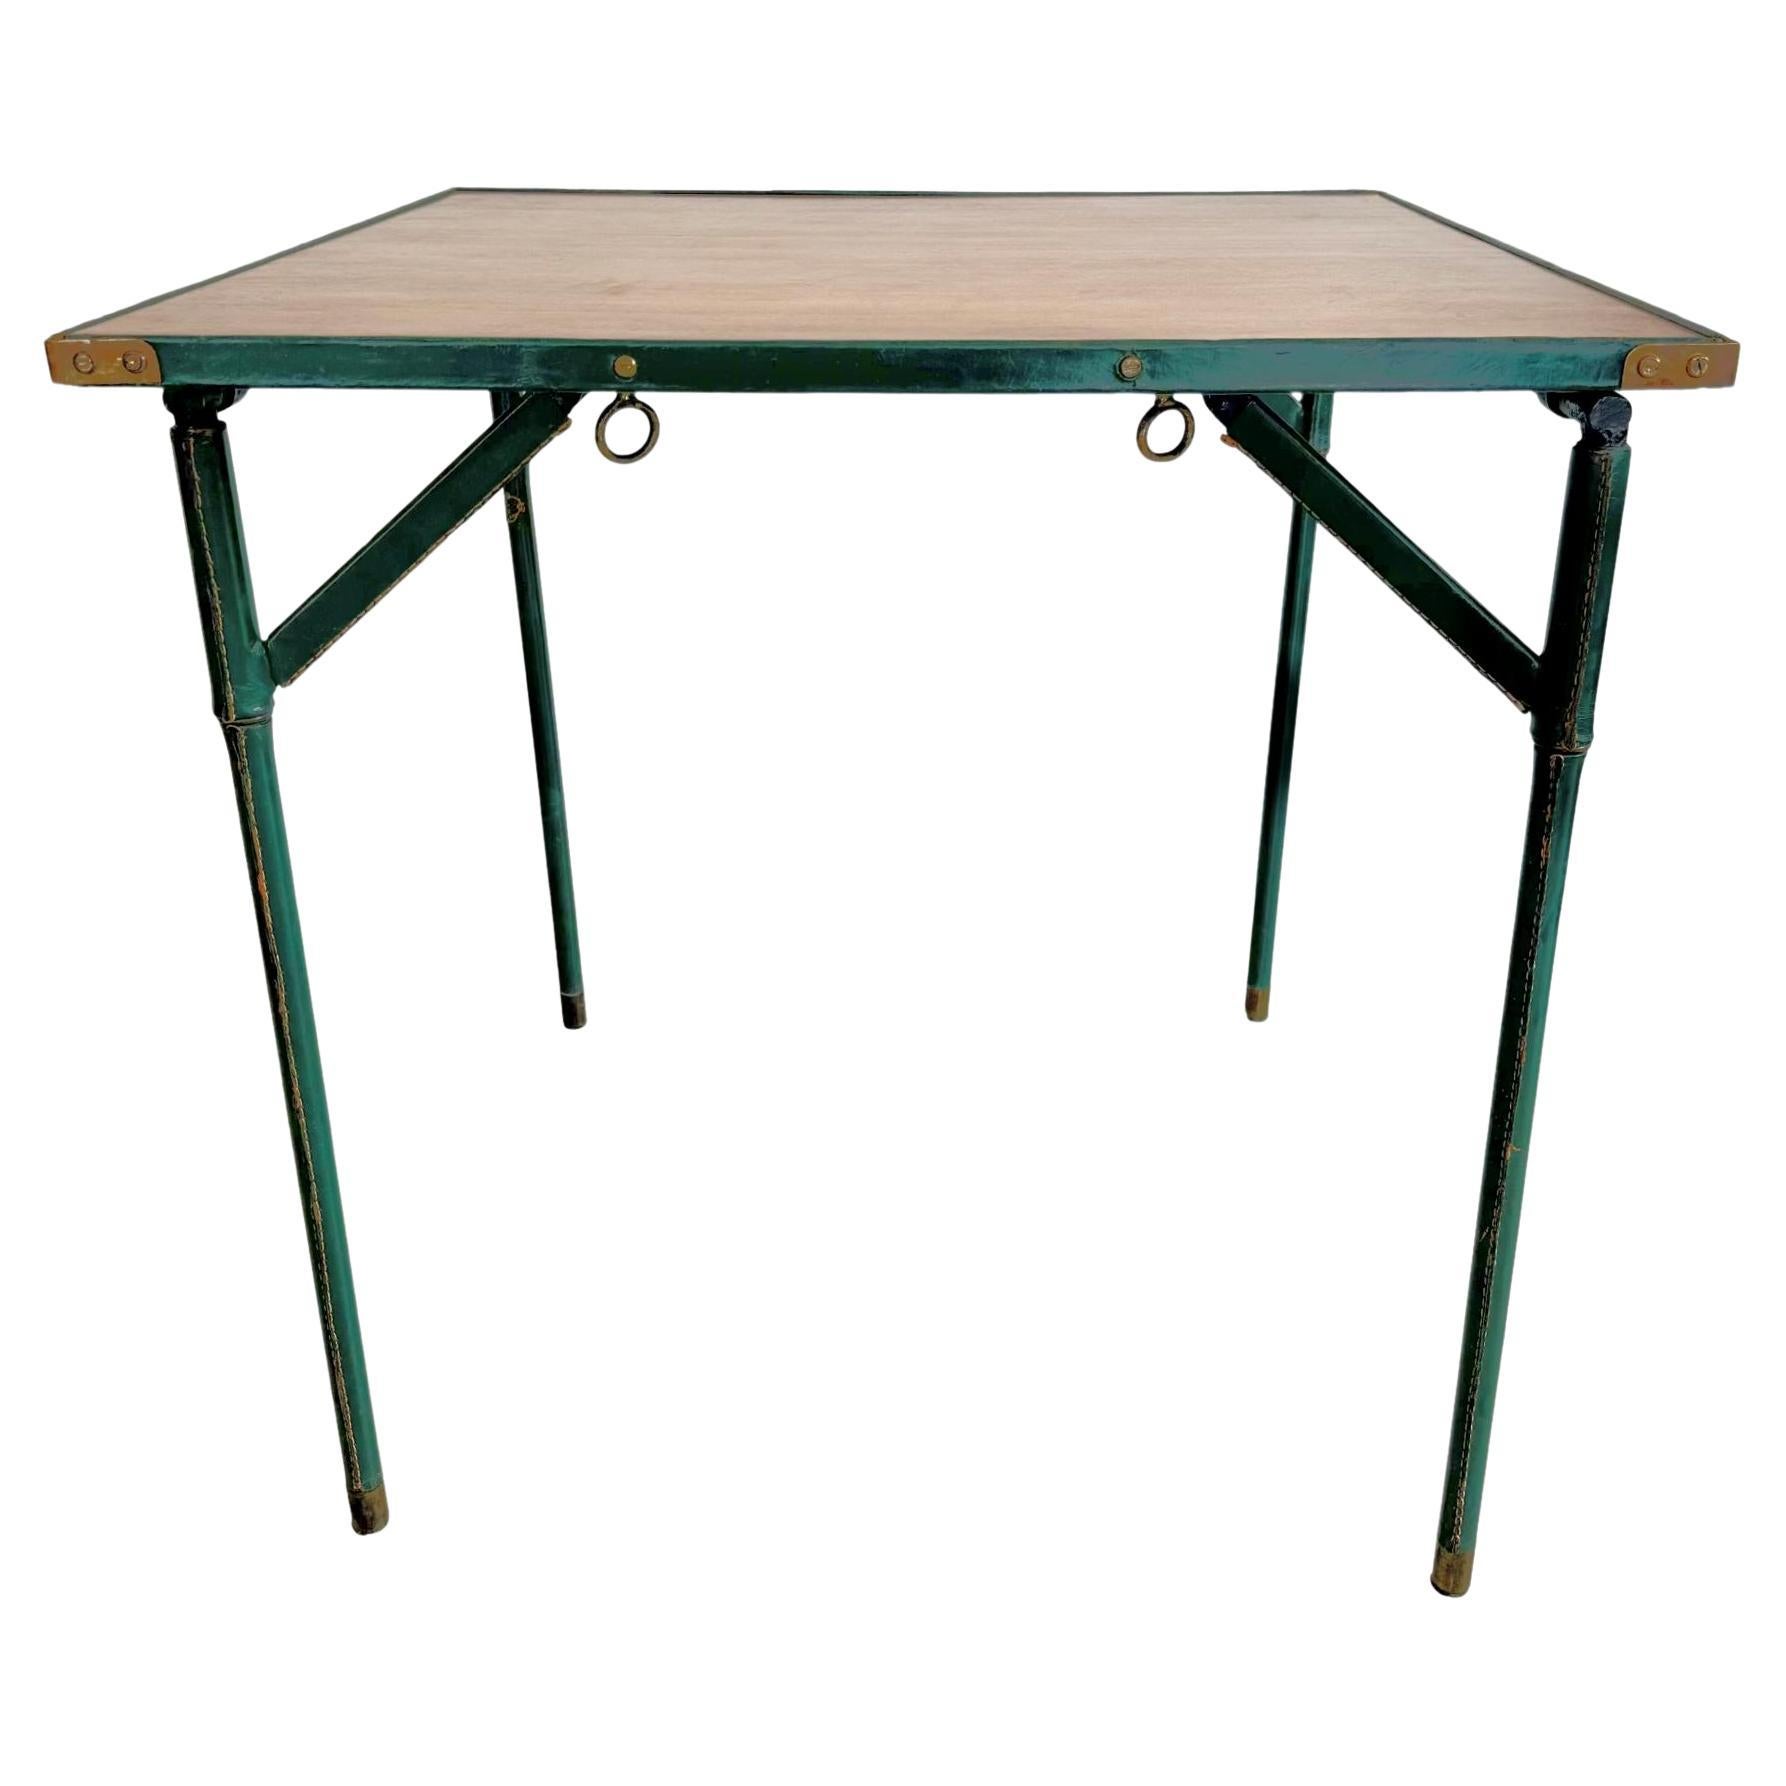 Jacques Adnet Green Leather and Wood Game Table, 1950s France For Sale